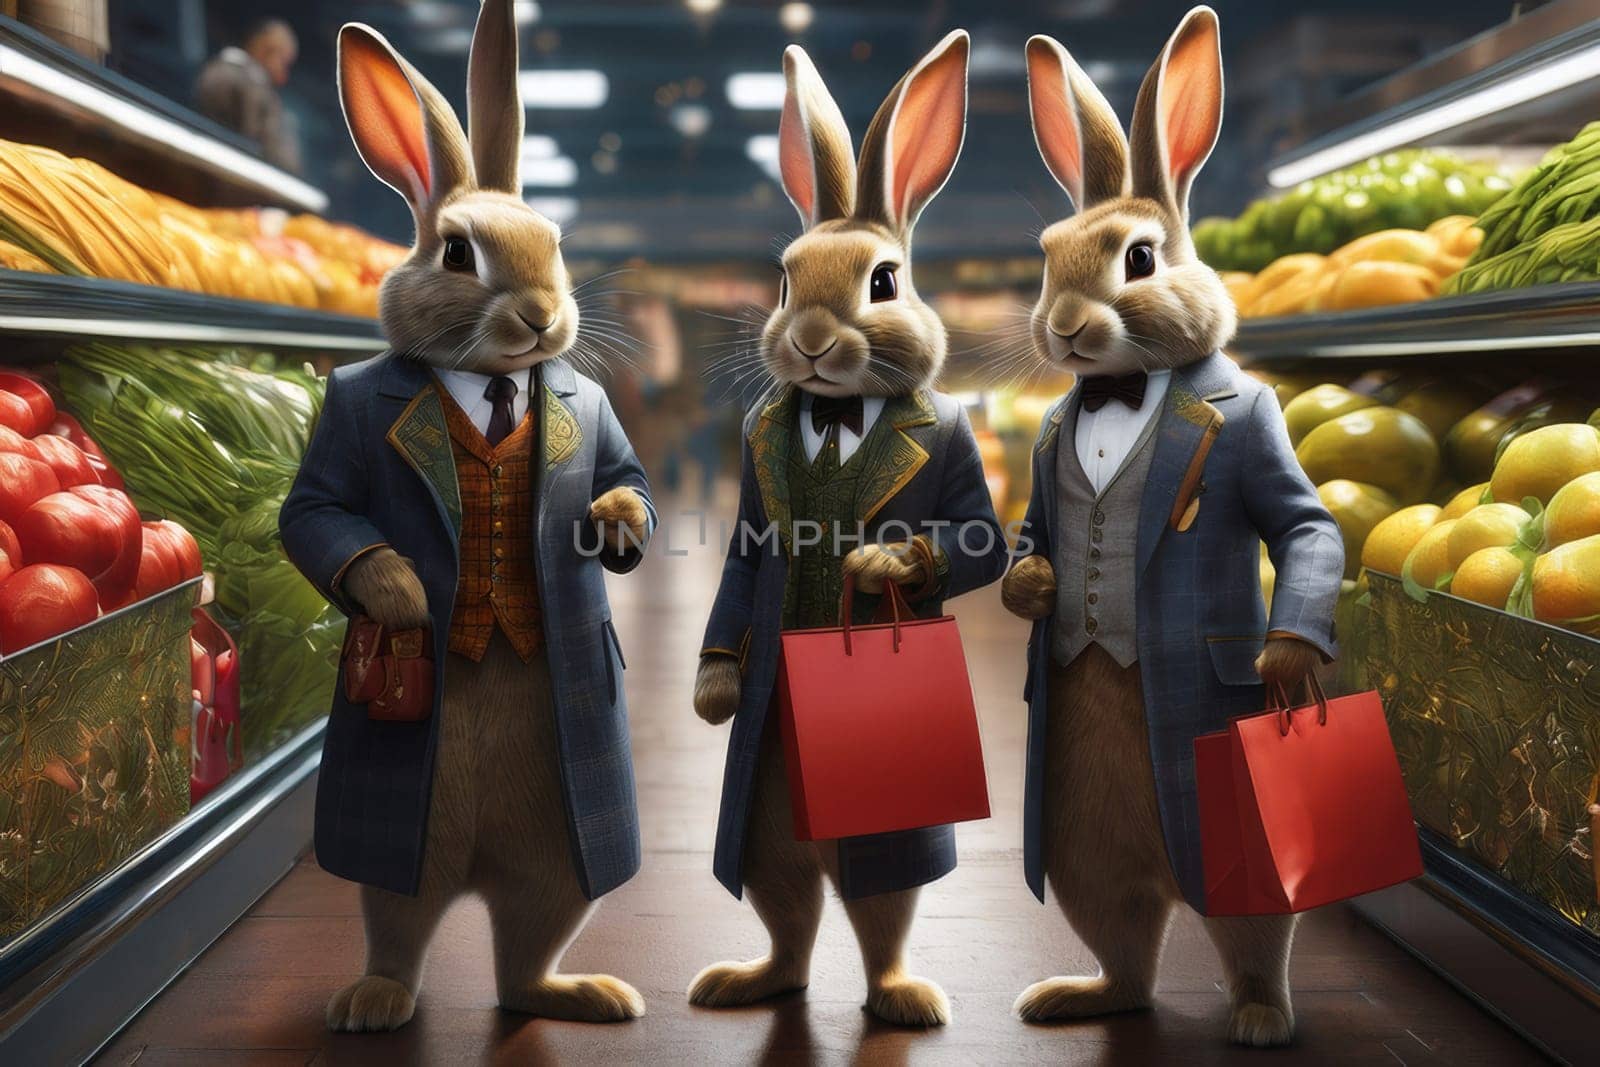 A family of rabbits in a store with carts makes purchases.